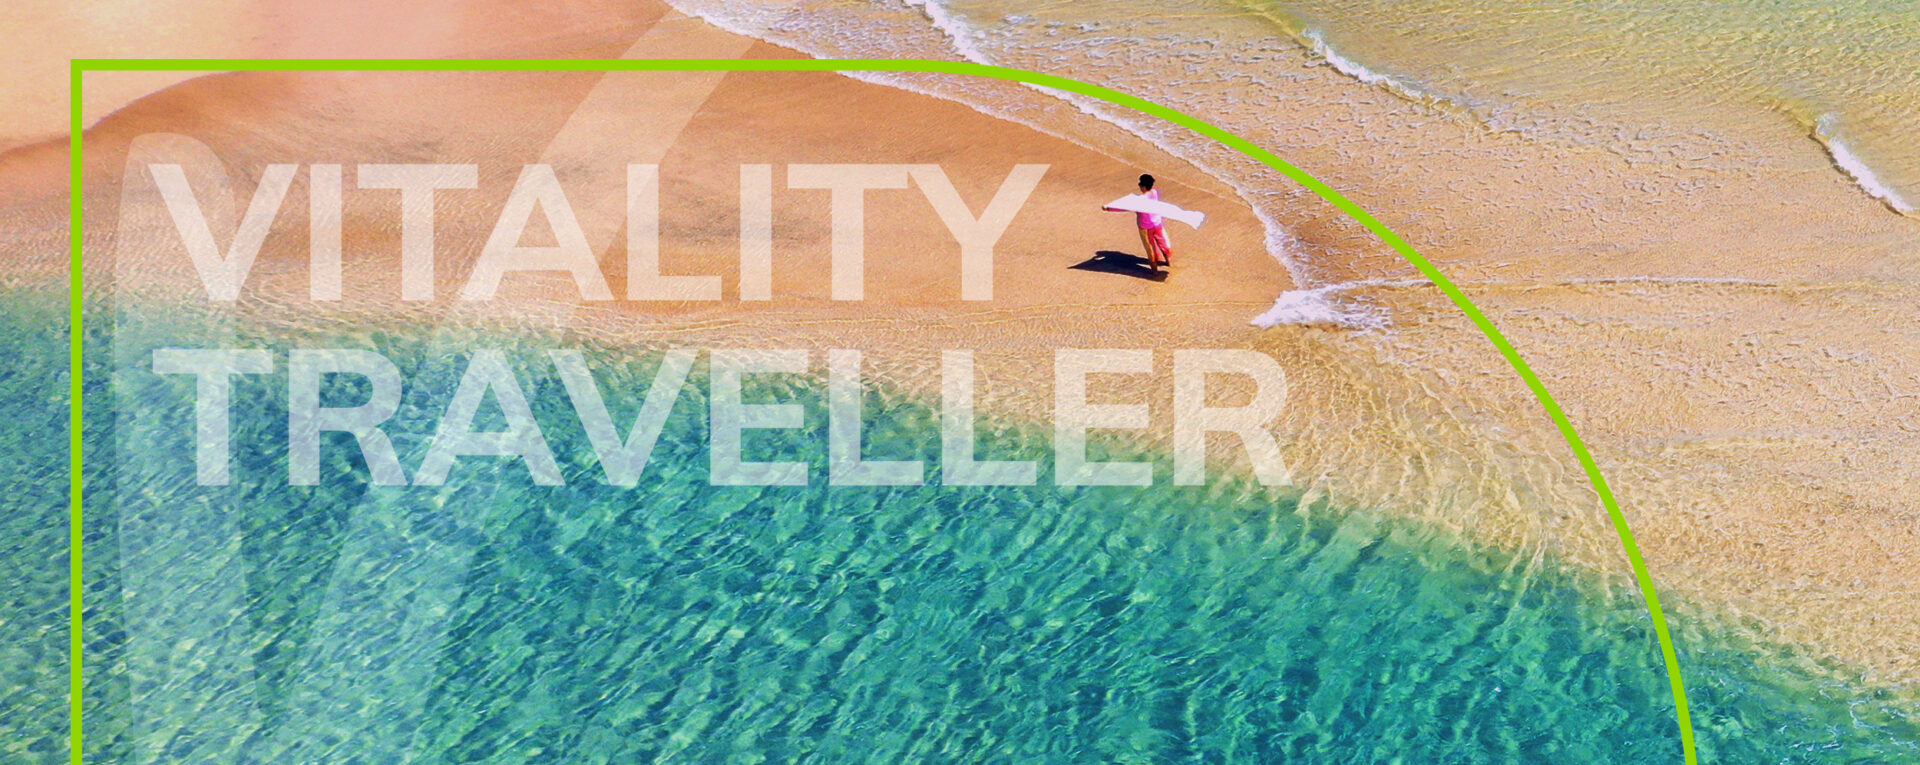 Vitality Traveller wins Everlytic's You Mailed It Awards